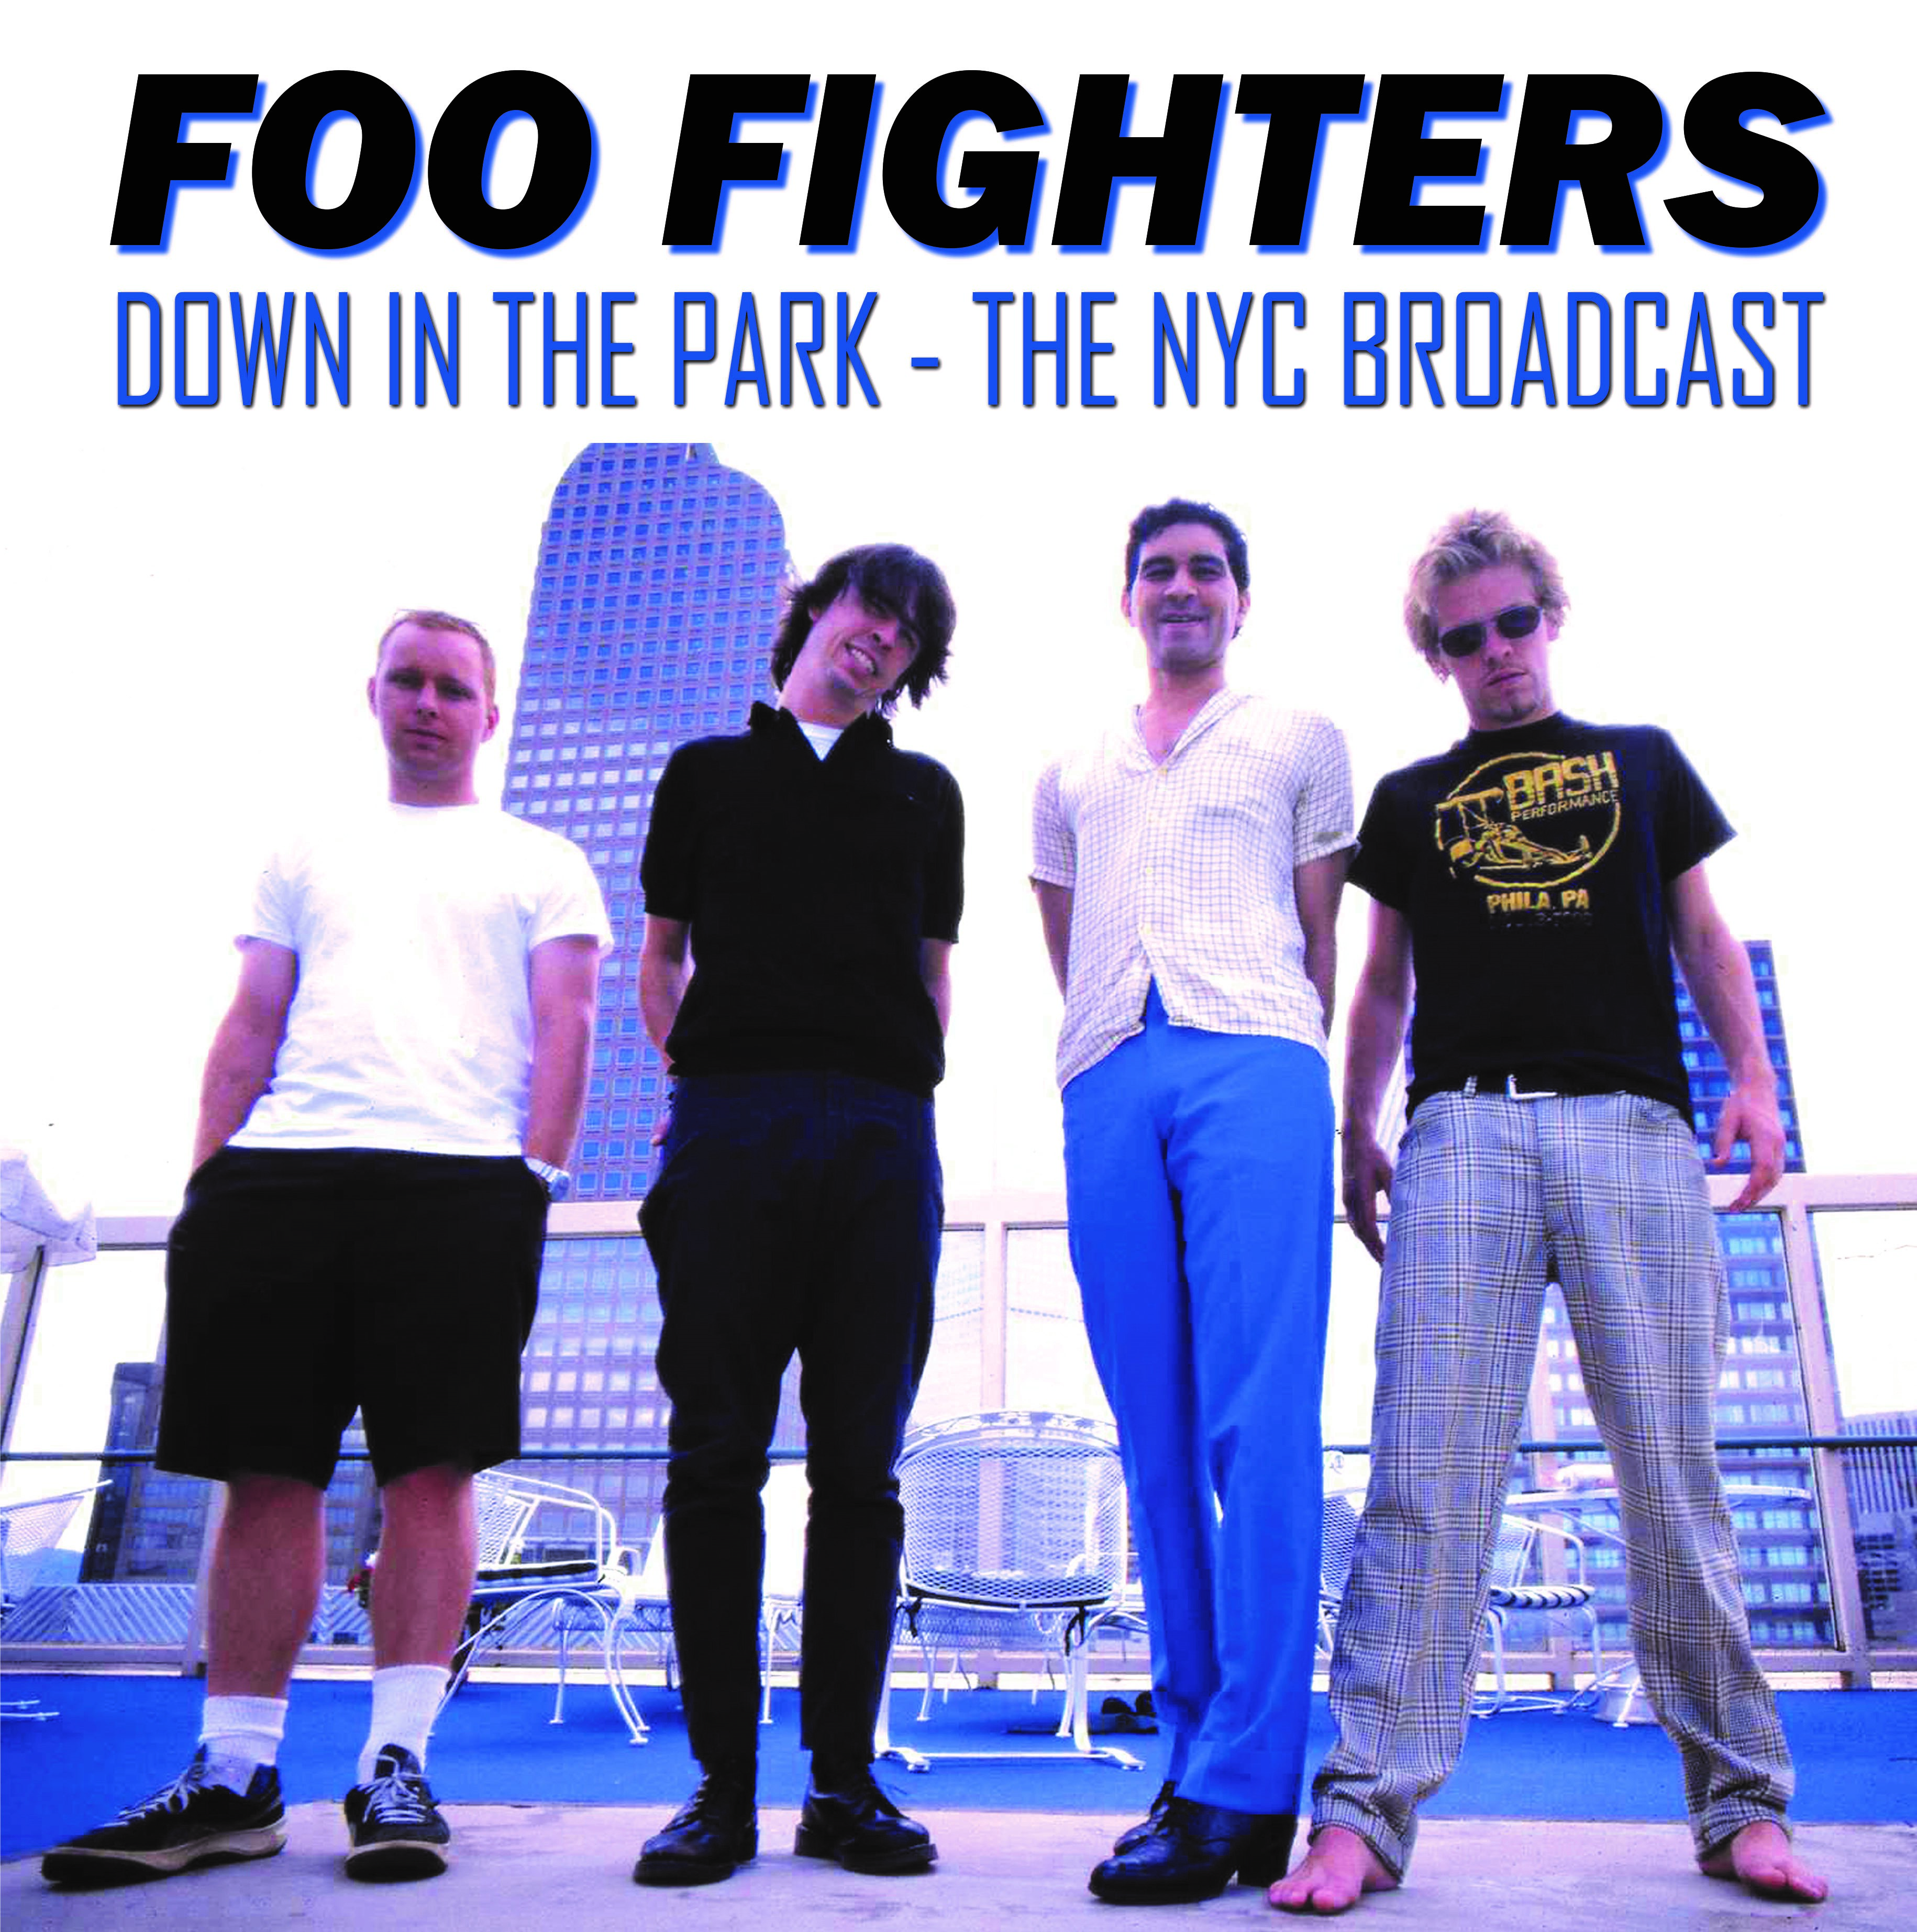 Foo Fighters - Down In The Park - The Nyc Broadcast - Photo 1/1